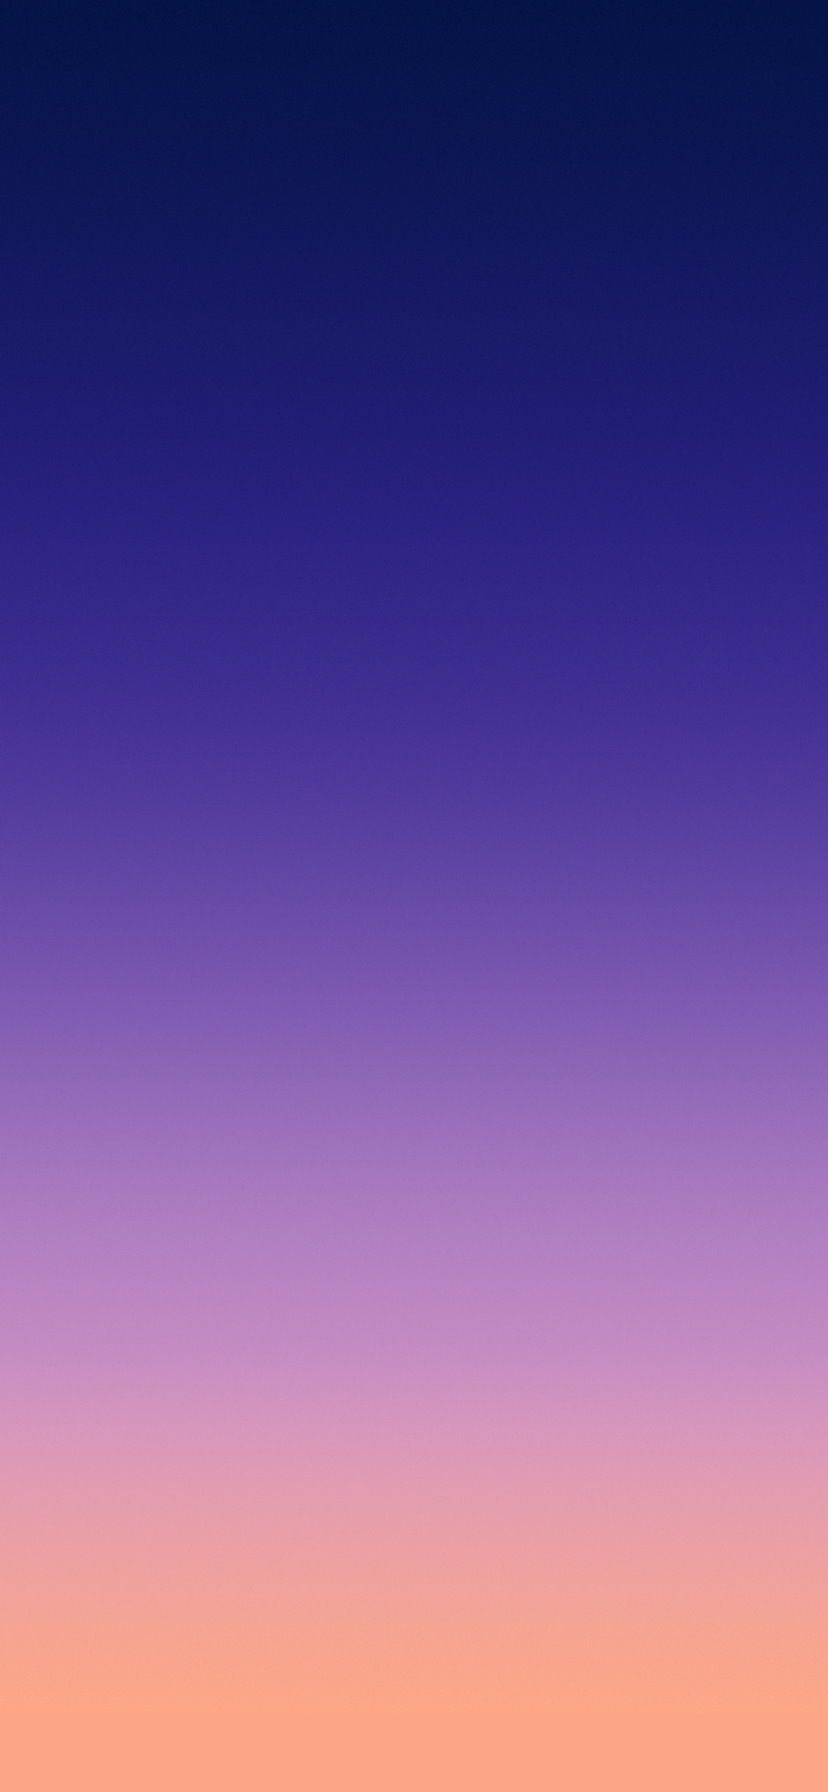 iPhone XR Colors Wallpaper Free iPhone XR Colors